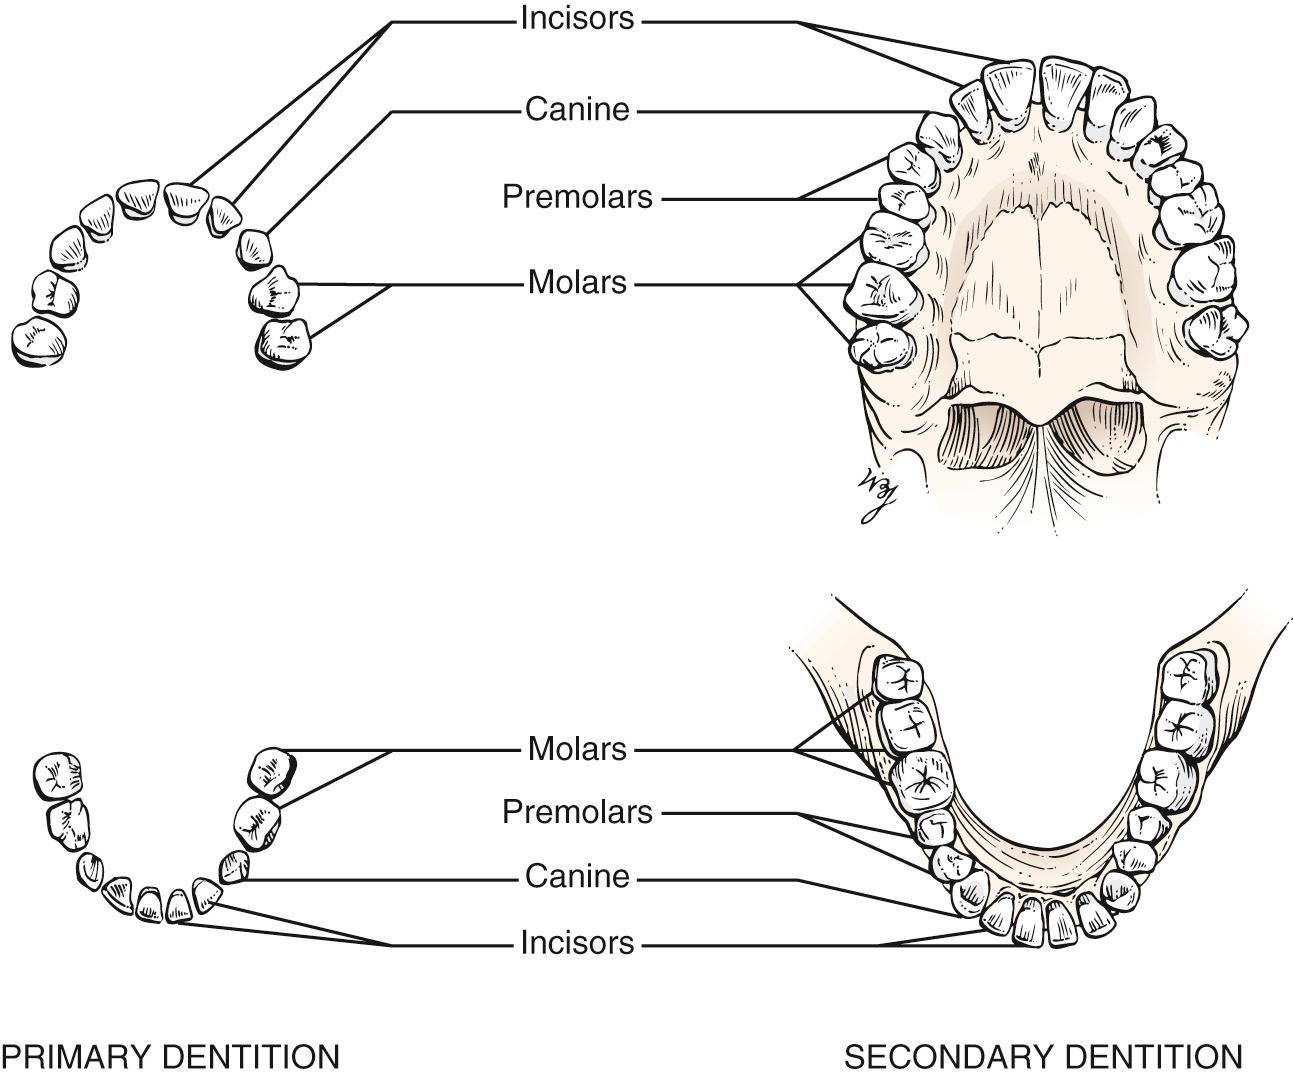 Fig. 12.6, Primary Dentition (left) and Secondary Dentition (right) .